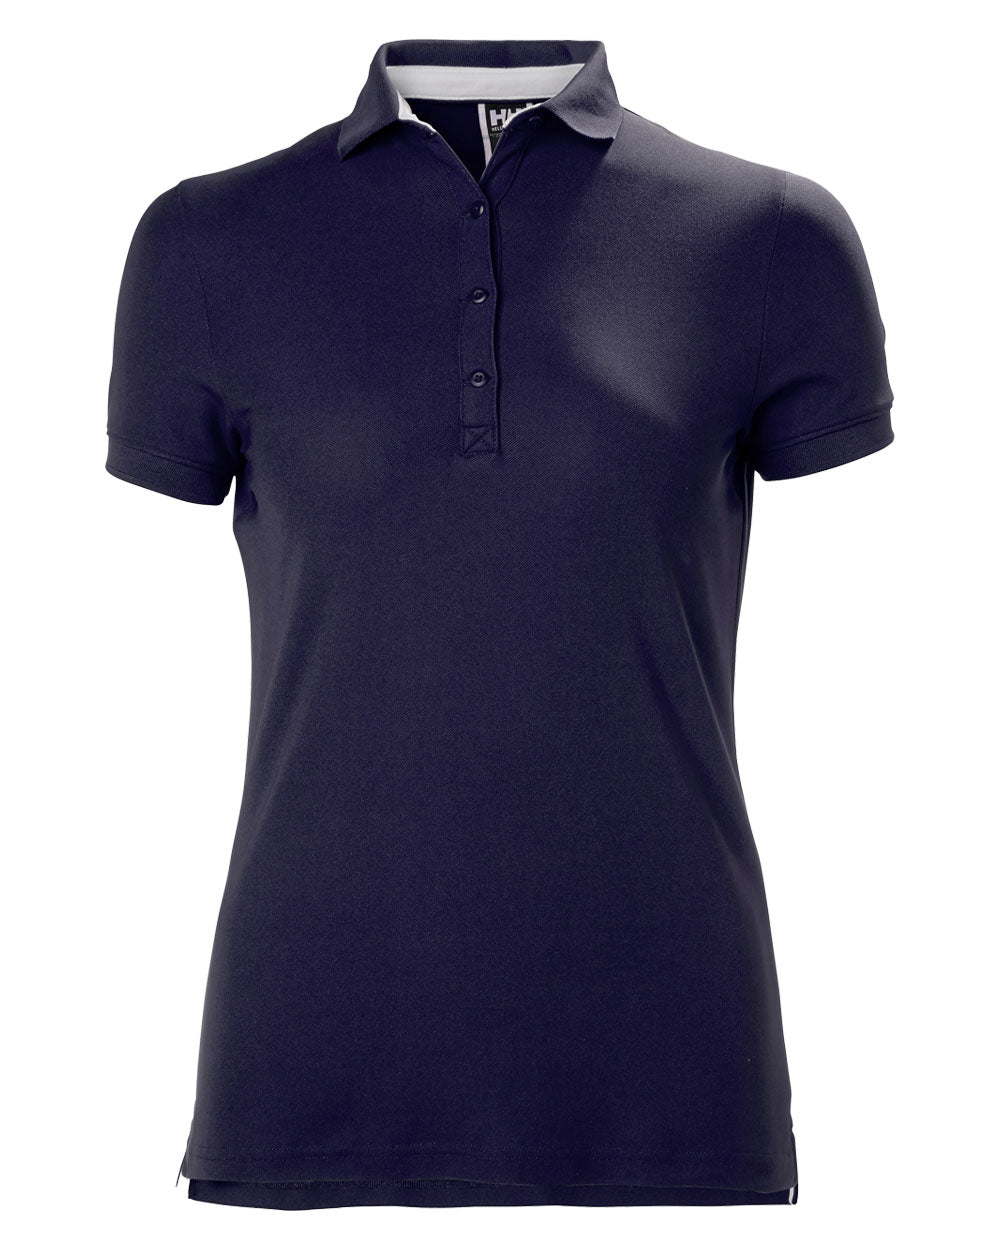 Navy coloured Helly Hansen Womens Polo on White background 